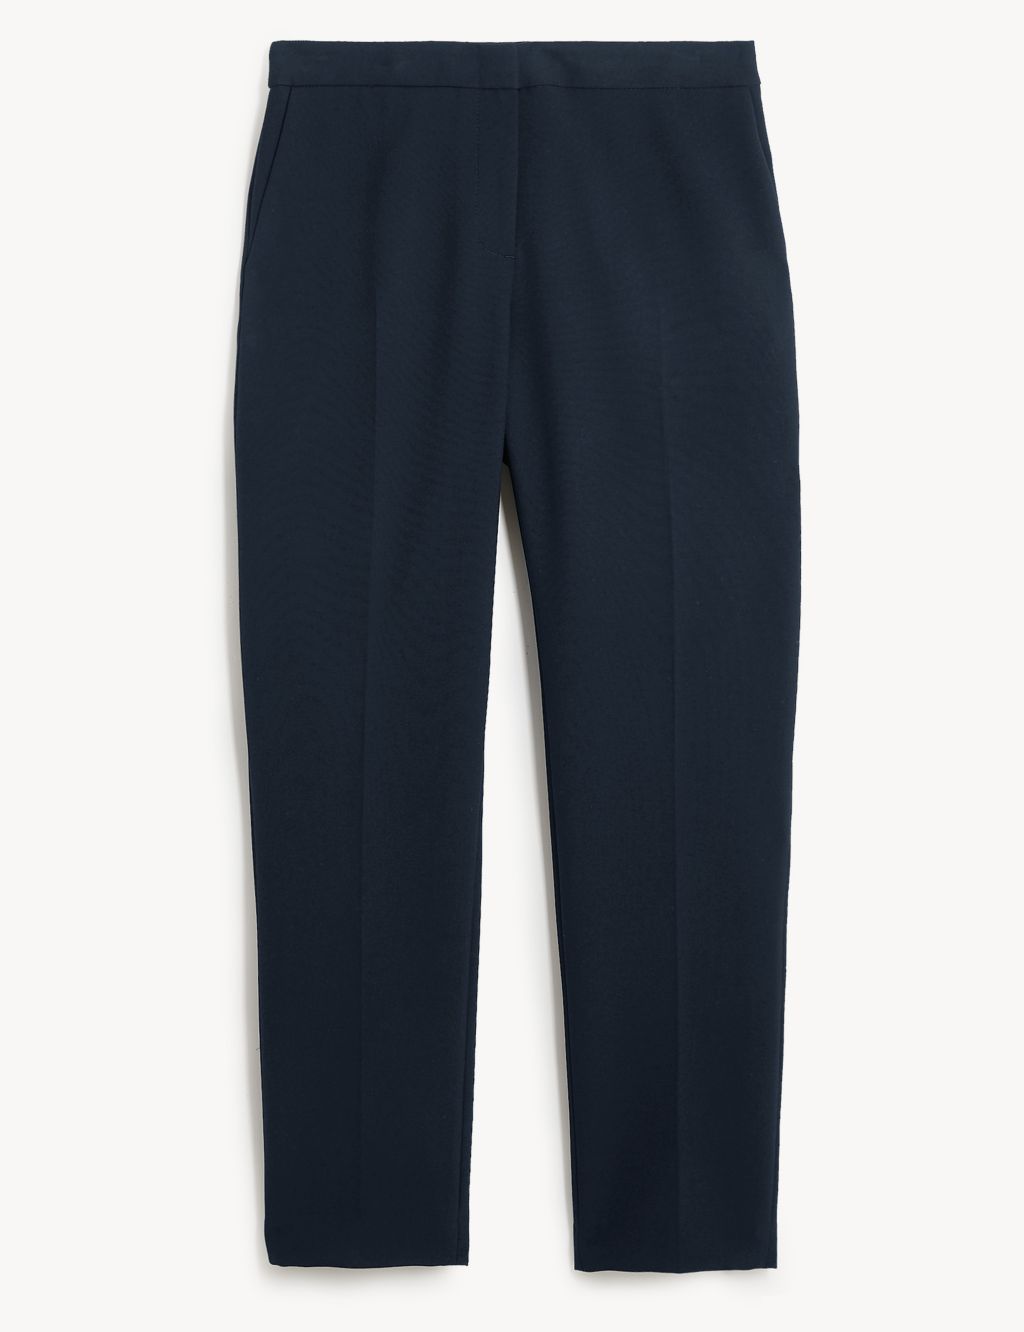 Women’s Tapered 7/8 Trousers image 1